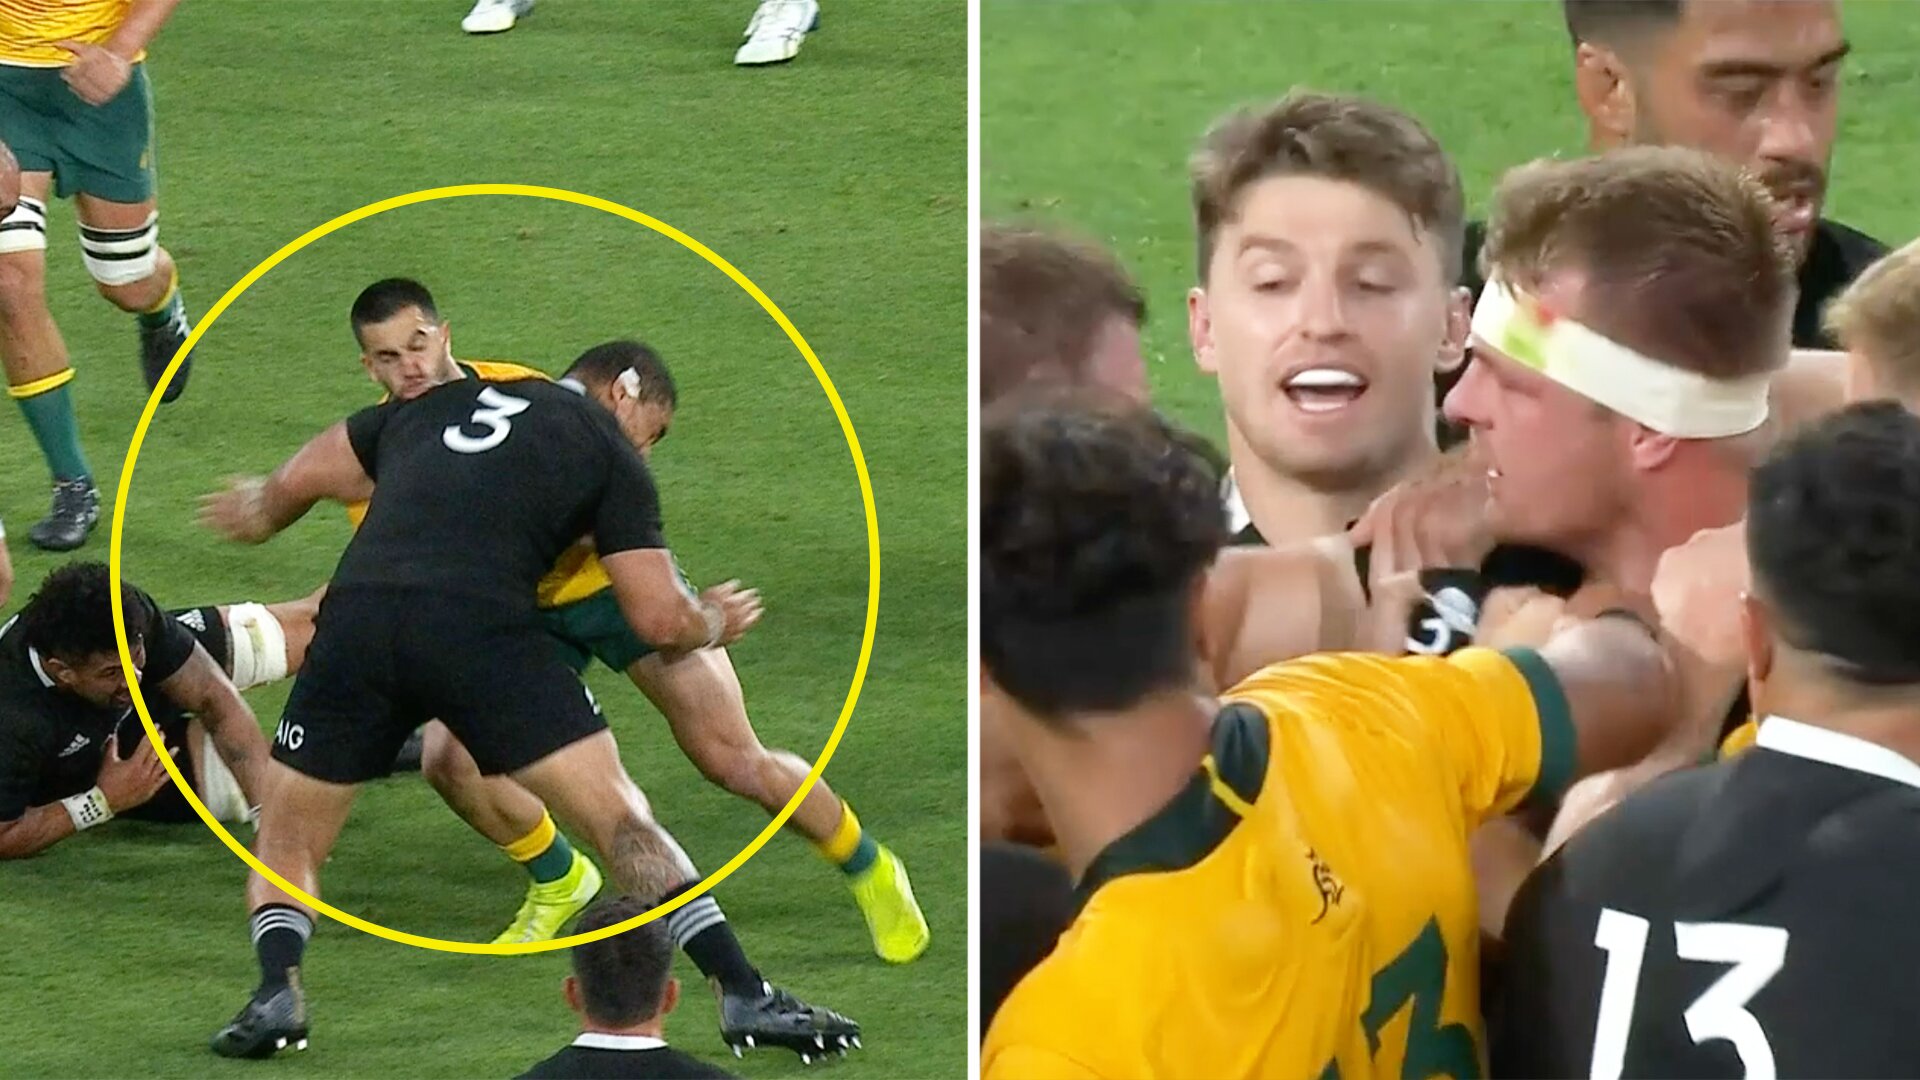 All Blacks vs Wallabies descends into chaos after two red cards in first half